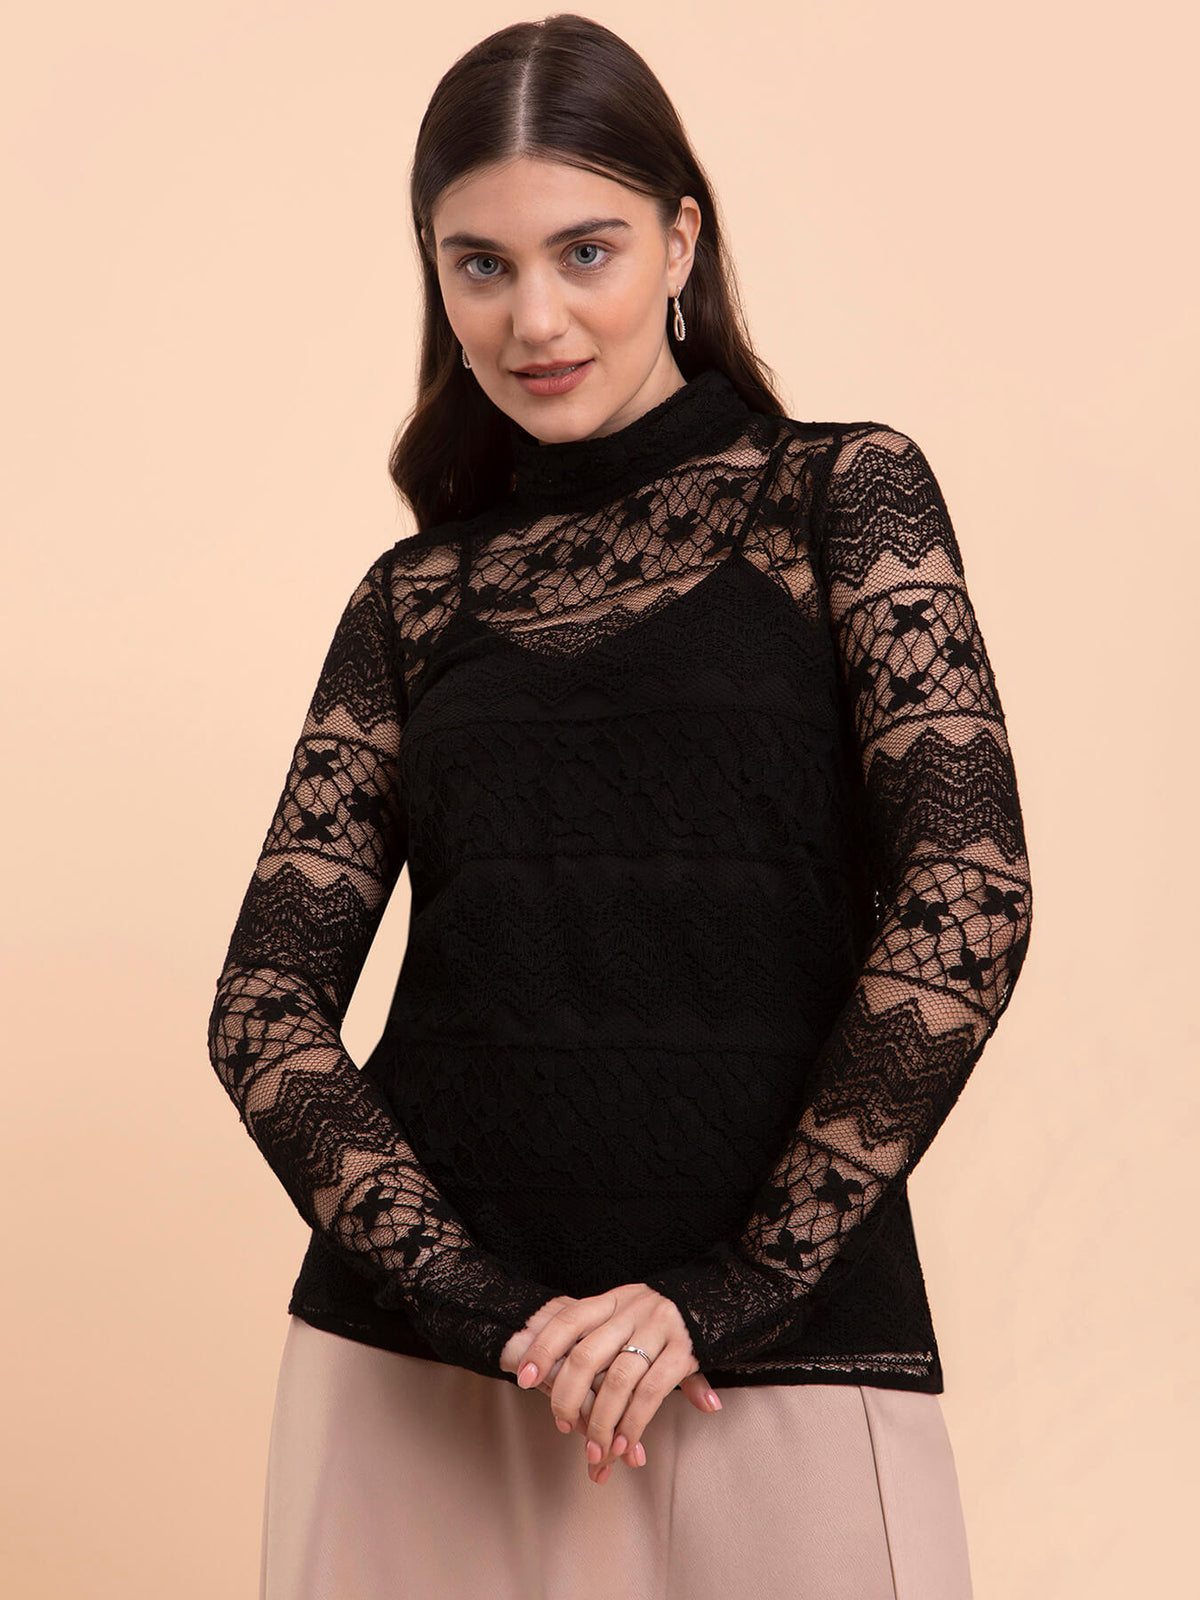 Ruched Neck Lace Top - Black